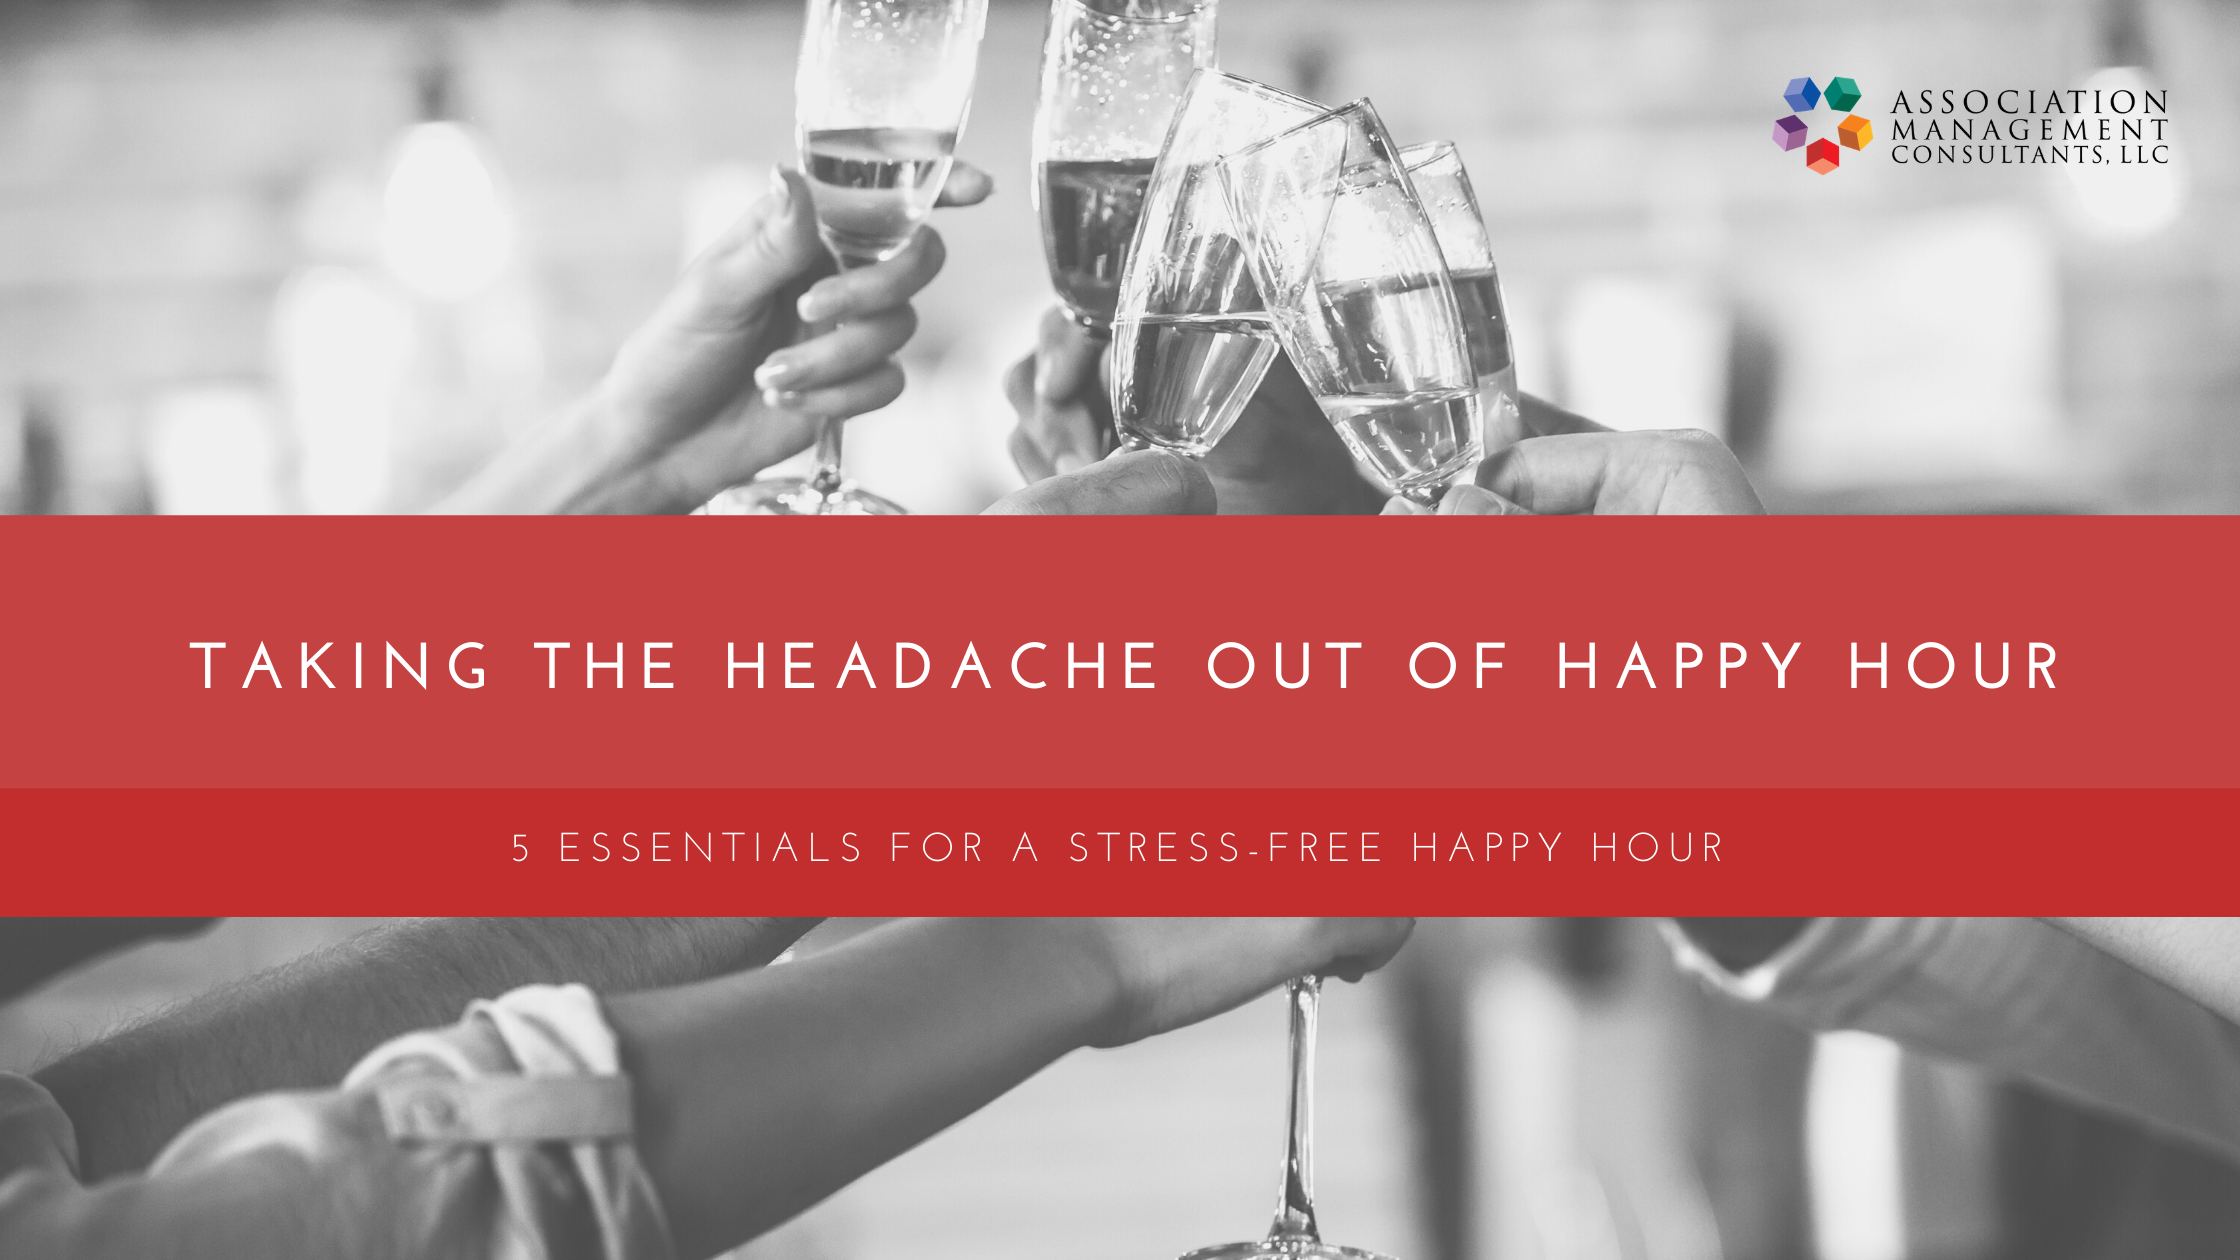 Taking the Headache out of Happy Hour!